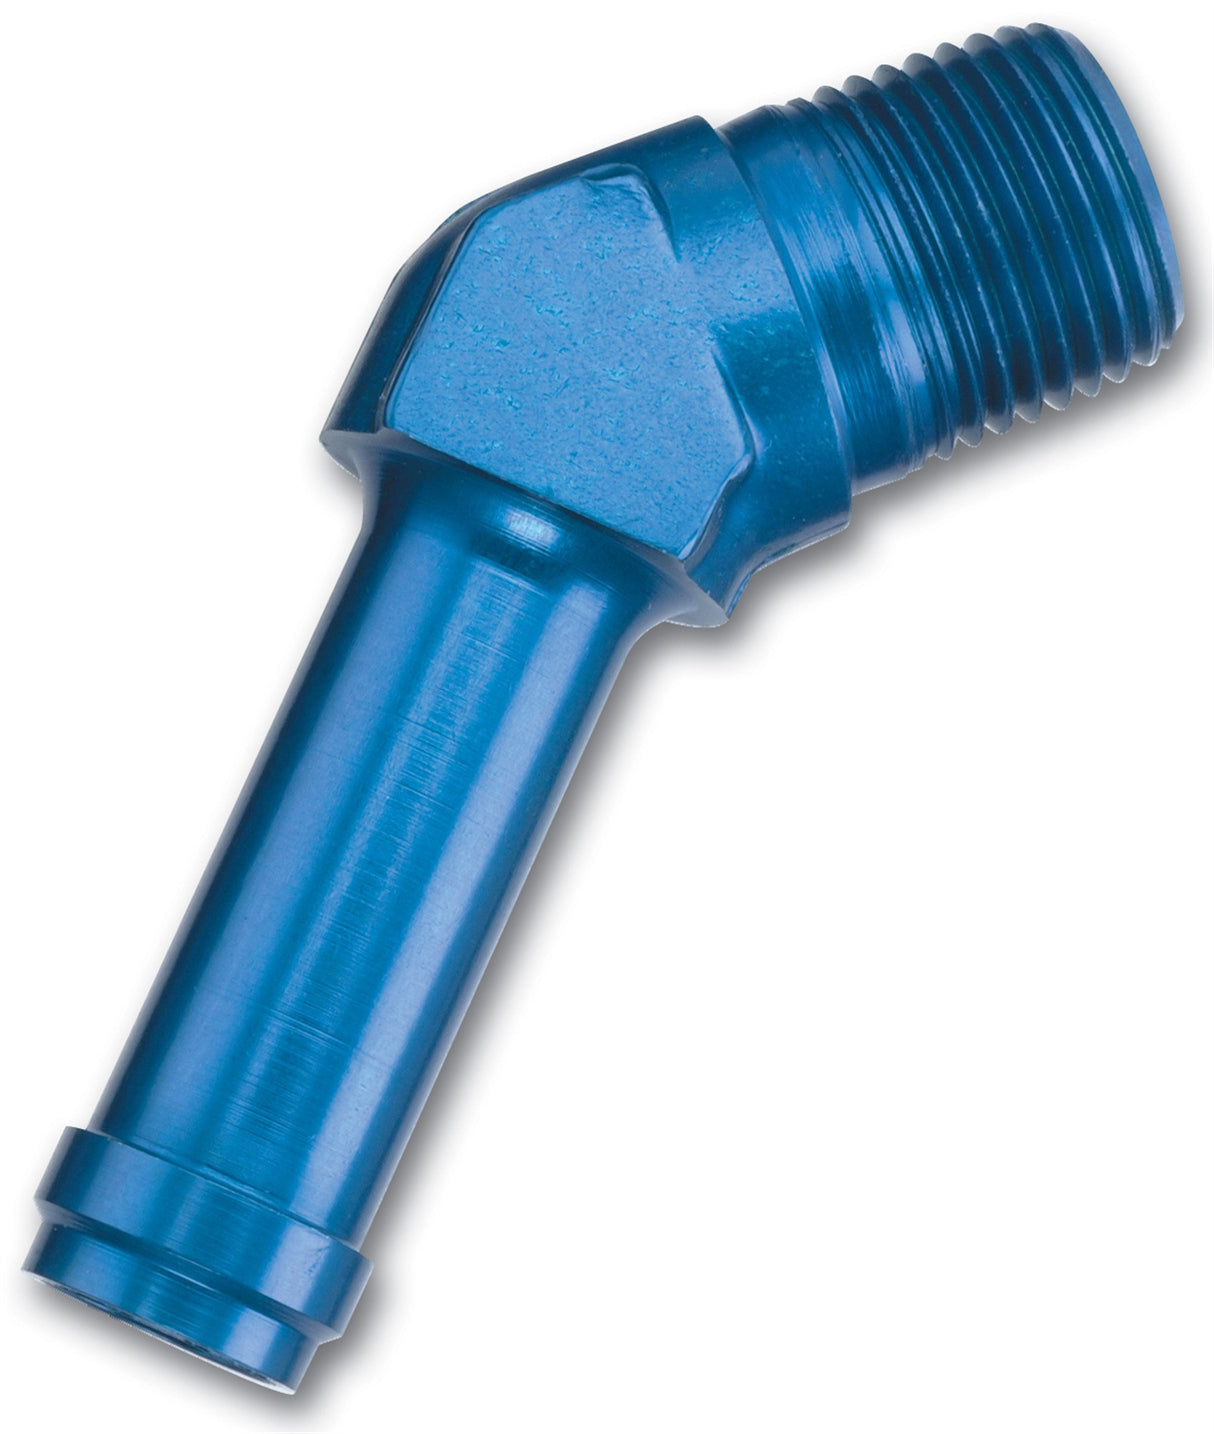 663070 | ADAPTER FITTING 3/8" NPT MALE TO 1/2" OD MALE TUBE 45 DEG BLUE ANODIZED